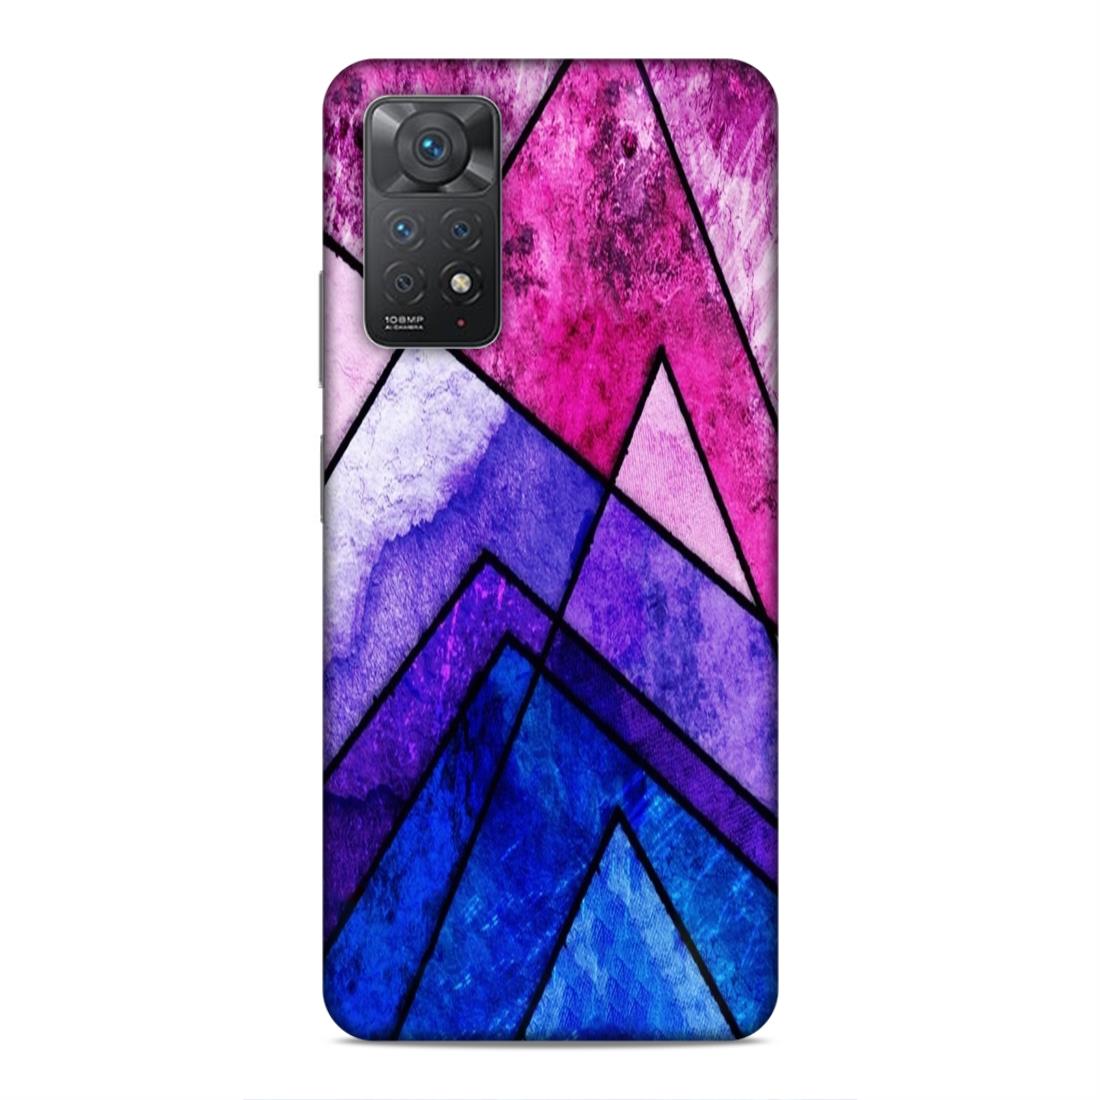 Blue Pink Pattern Hard Back Case For Xiaomi Redmi Note 11 Pro 4G / 5G / Note 11 Pro Plus 5G